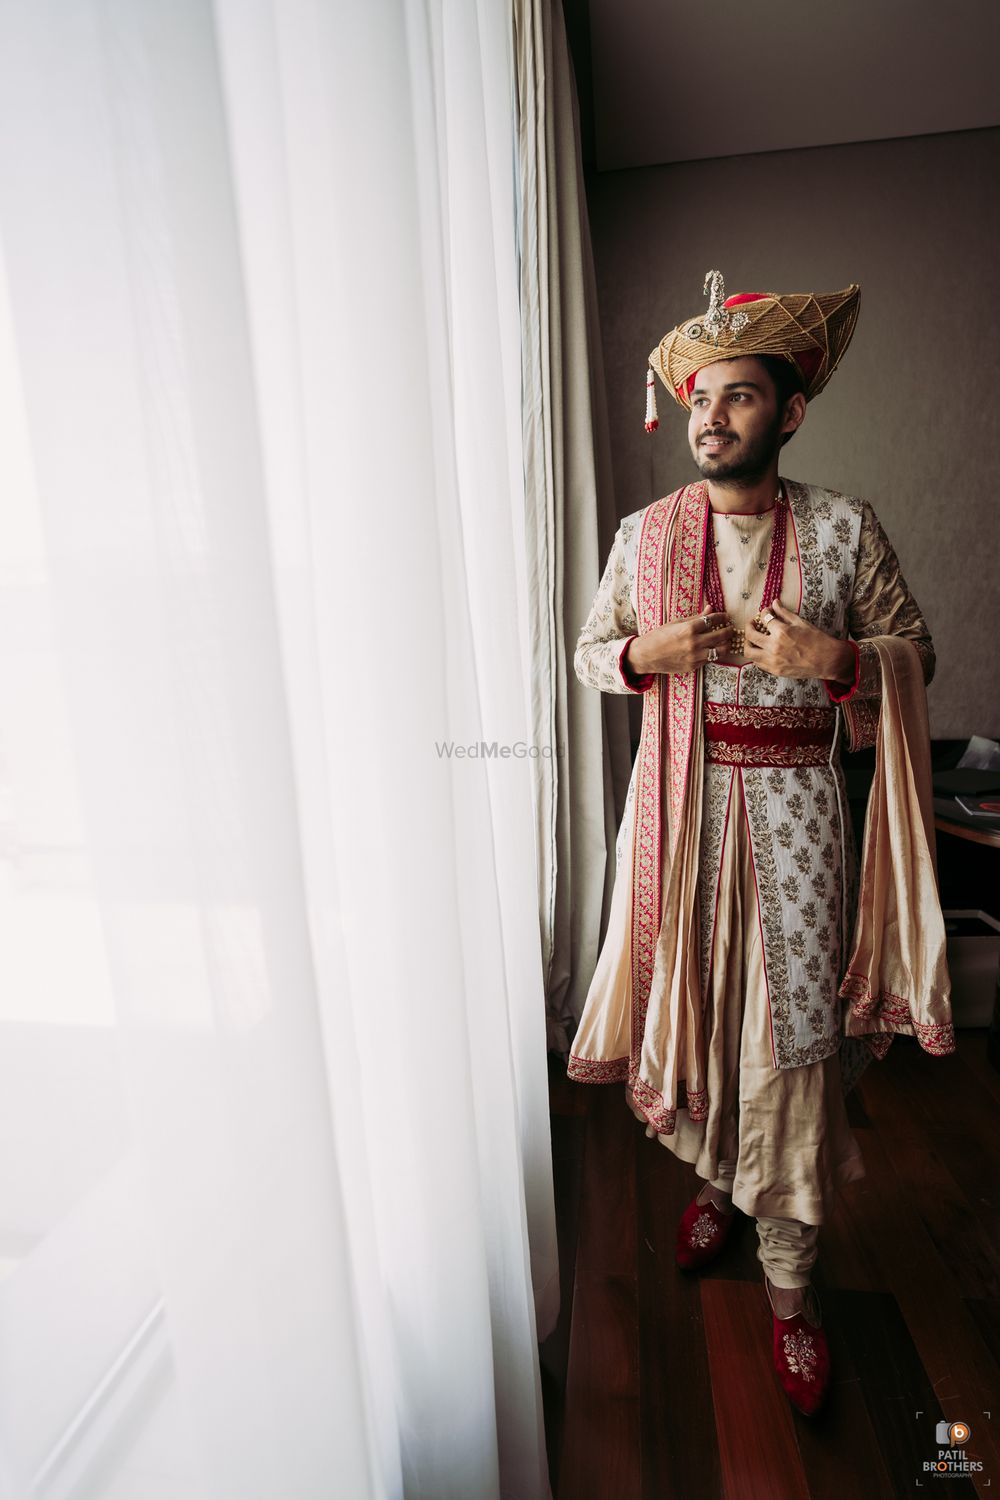 Photo of Groom in an off-white embroidered sherwani.